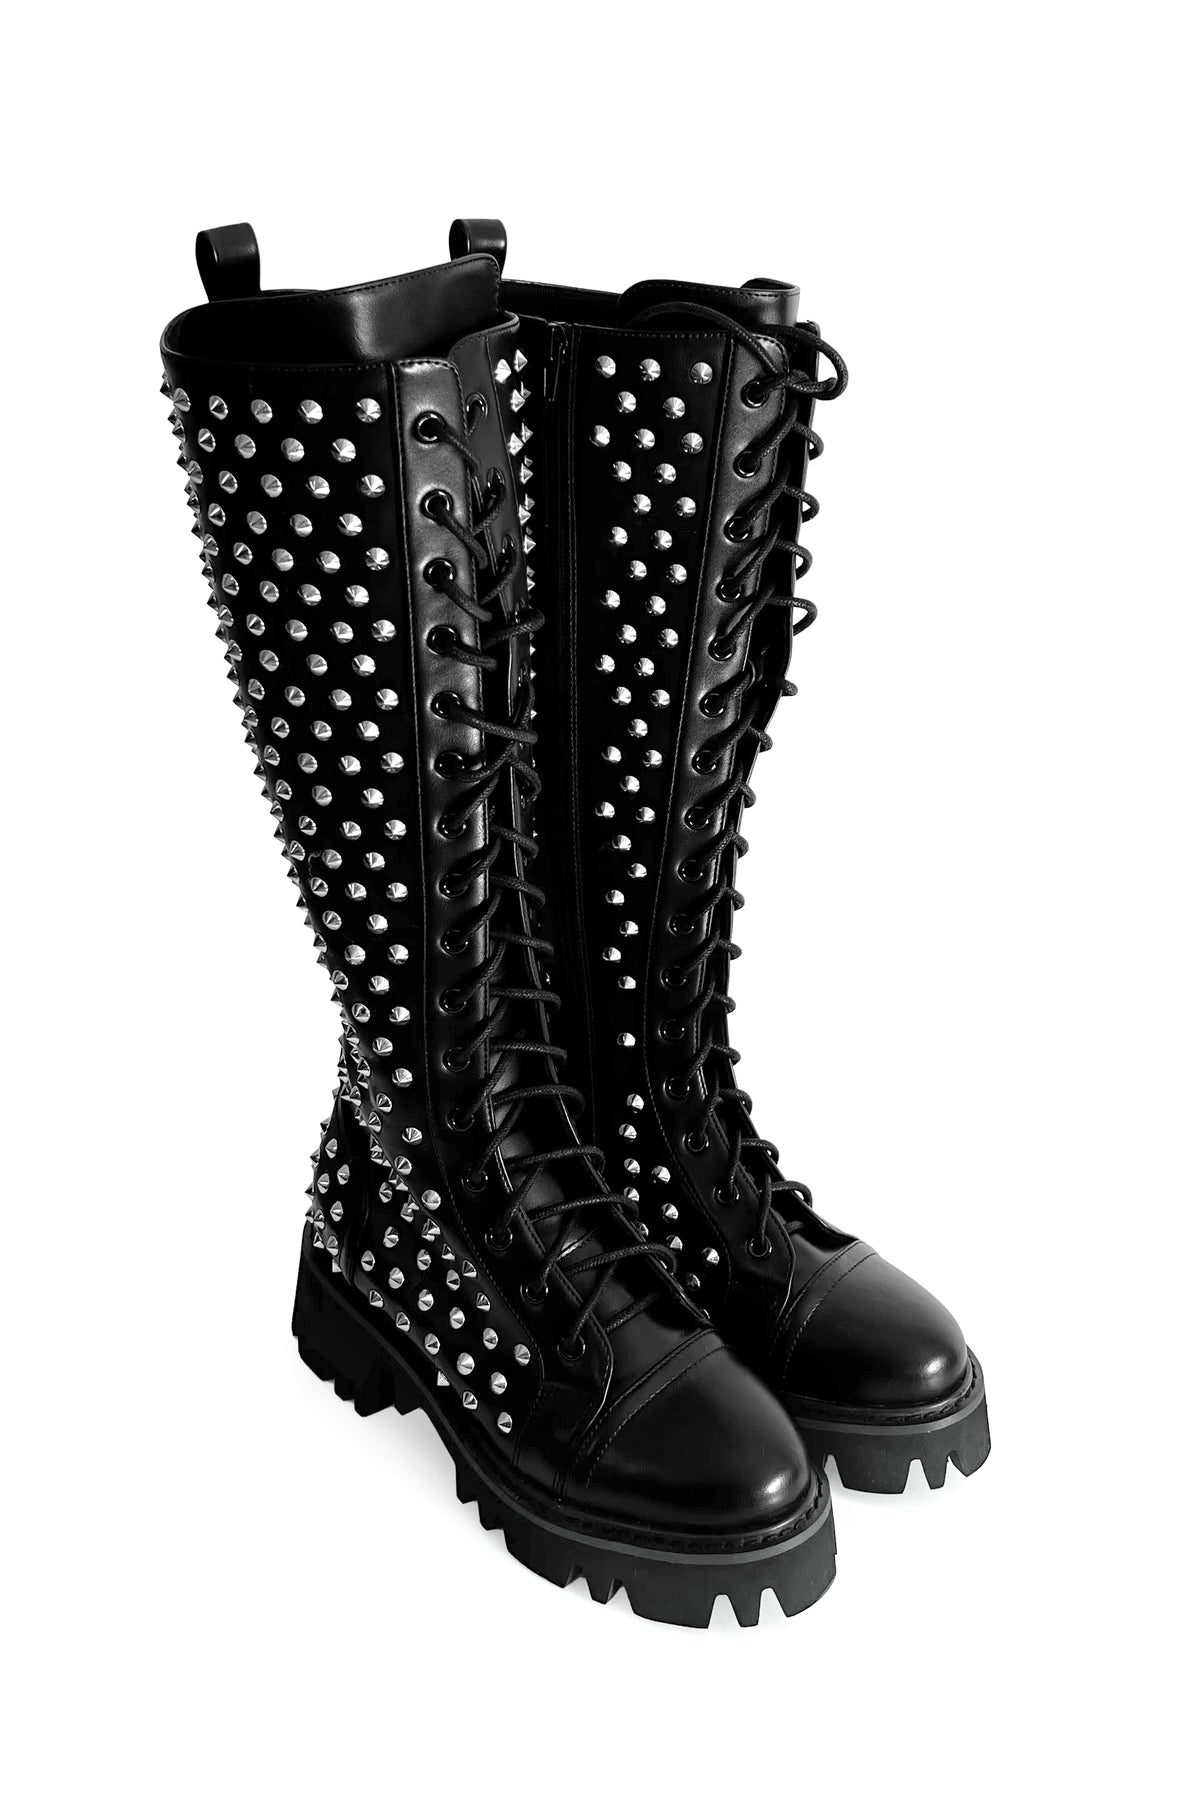 black vegan leather knee high boots covered in silver cone studs